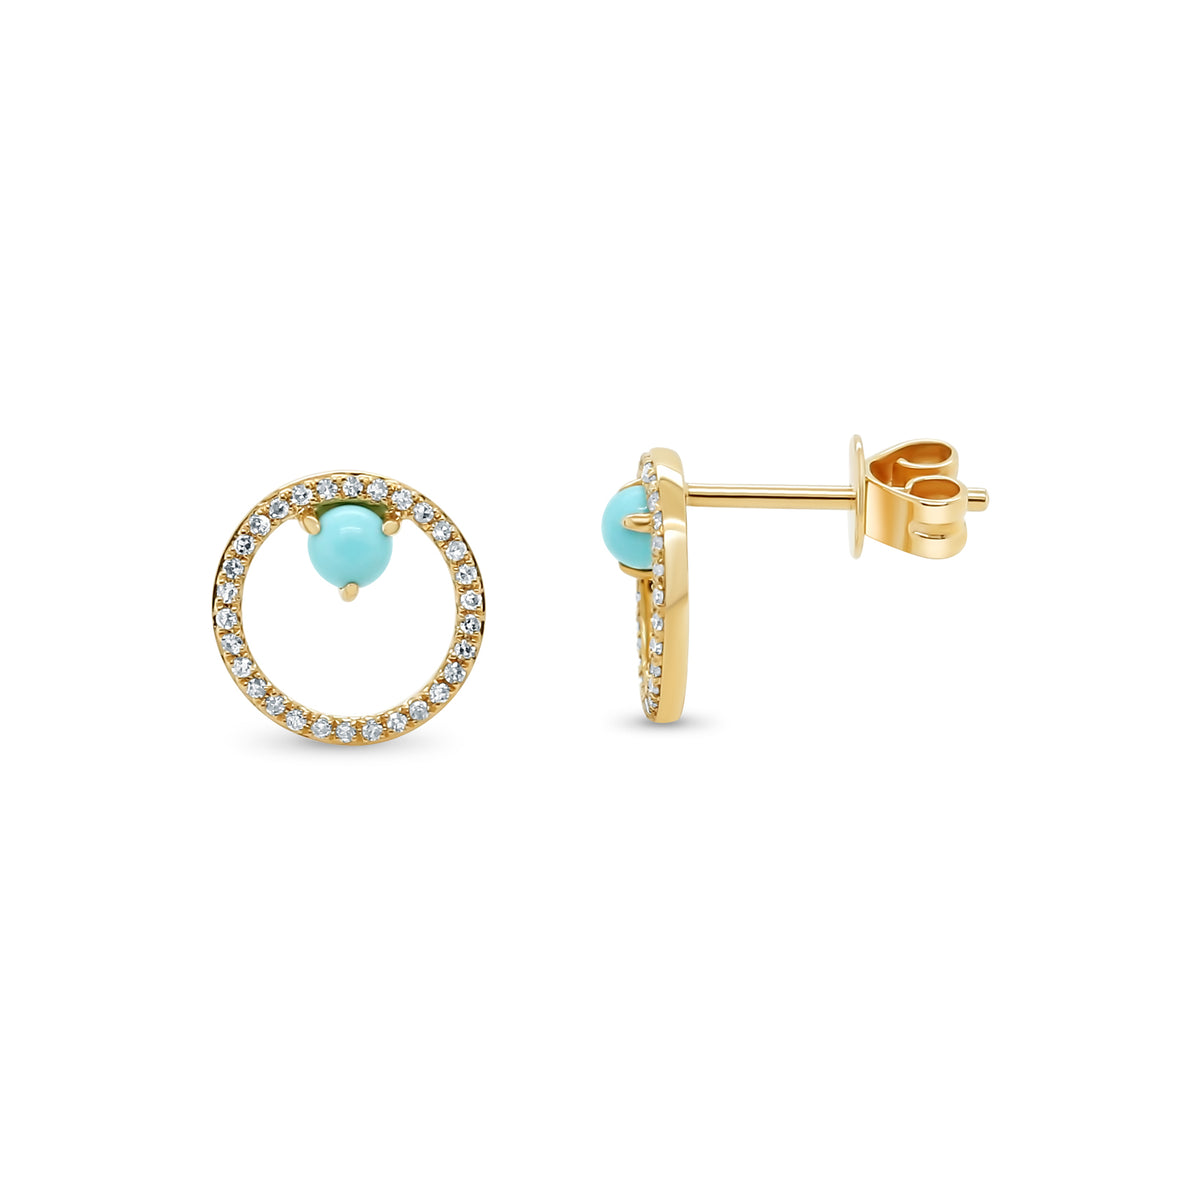 14k yellow gold diamond pave open ring with turquoise accent stud earrings